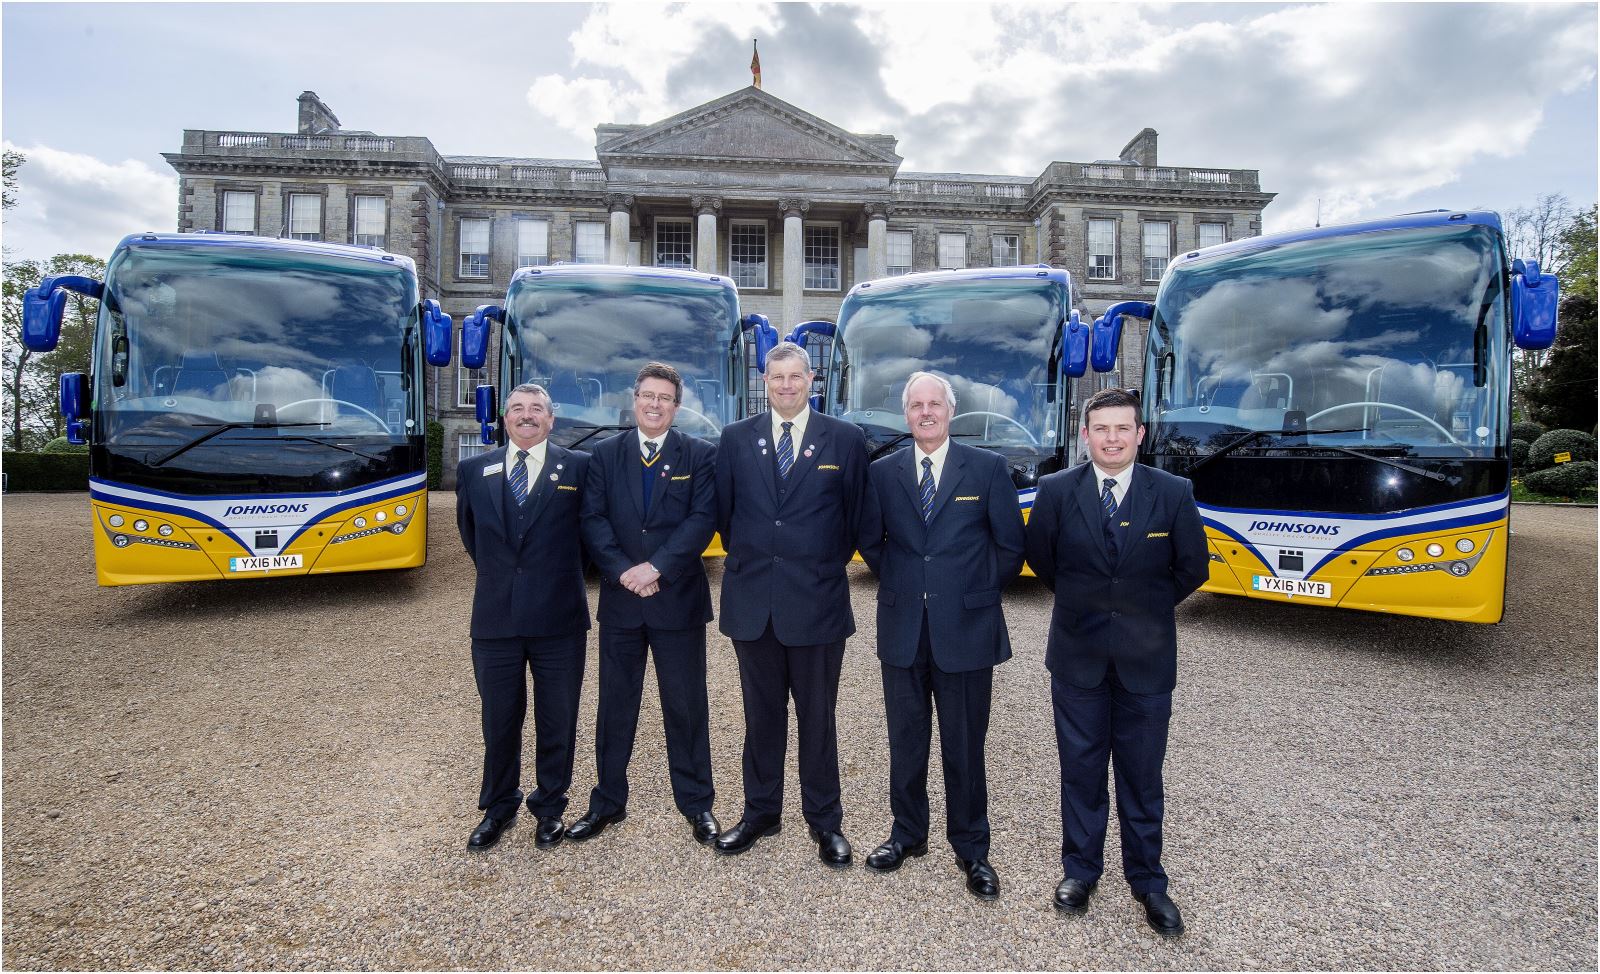 Coach hire for incoming groups to the UK